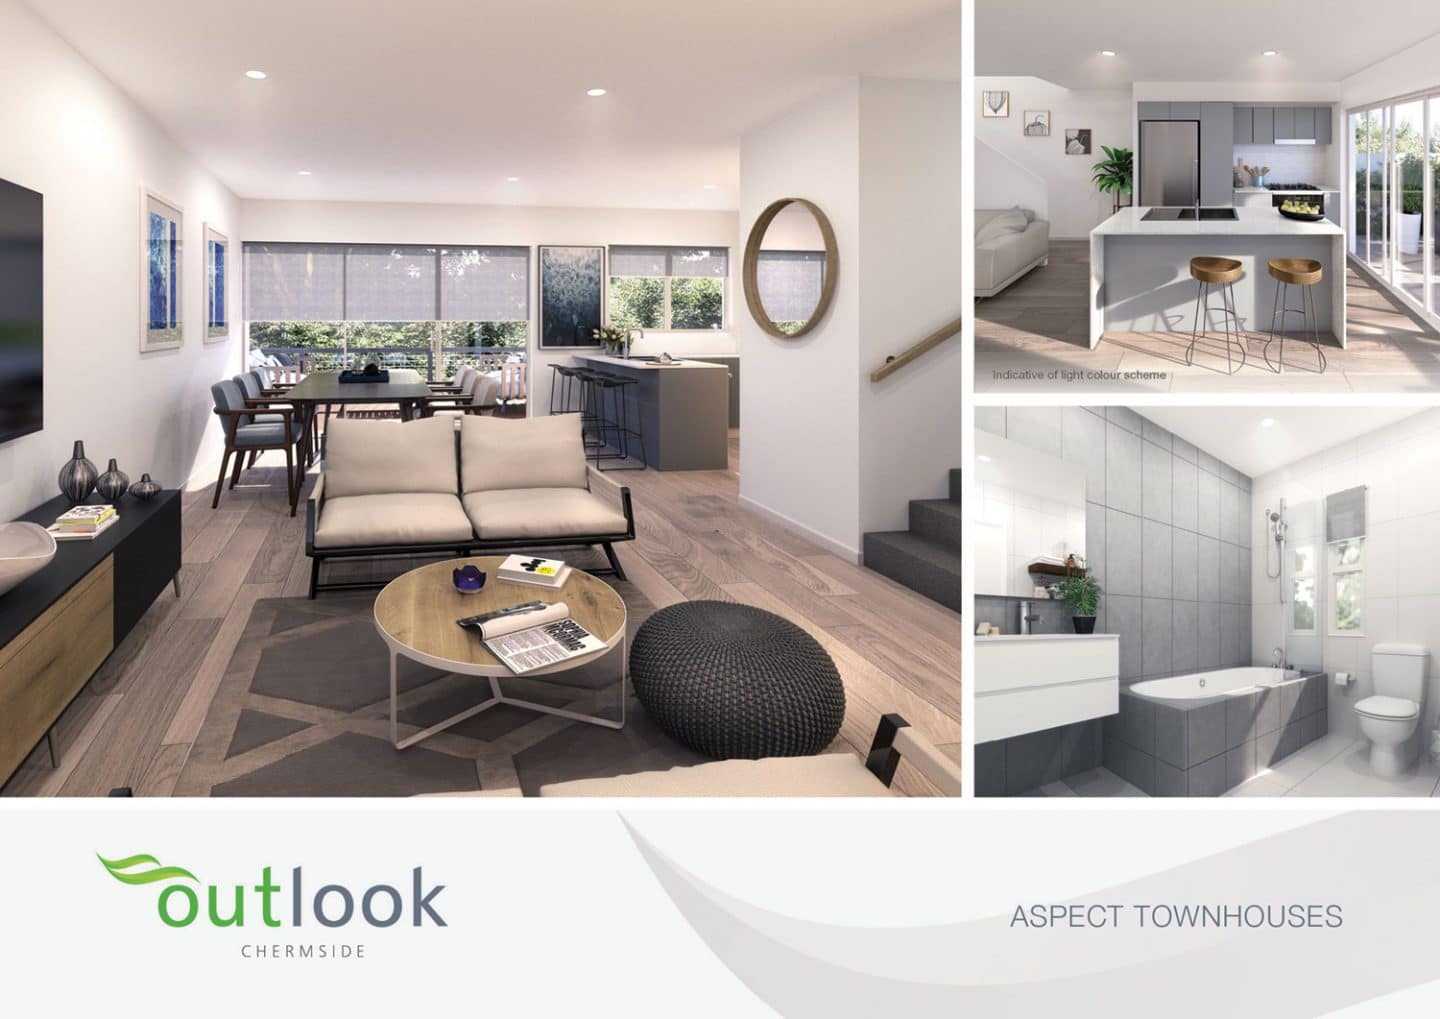 NOW SELLING & NBN READY 47 LUXURY TOWNHOUSES IN CHERMSIDE FROM $540,000